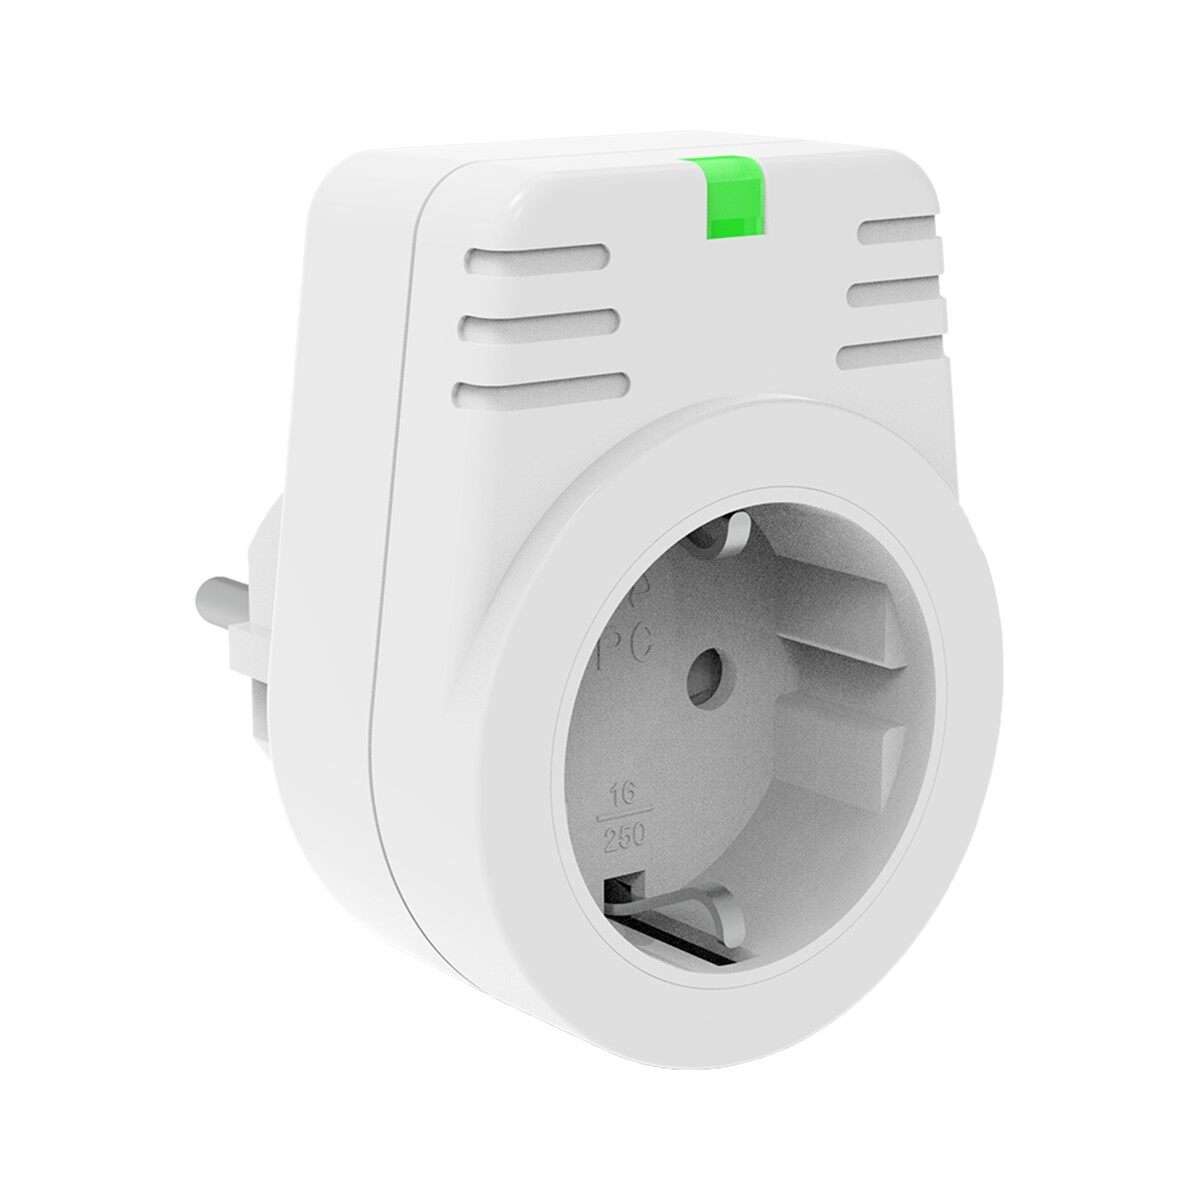 WiFi Socket, Support App remote control RSN909R